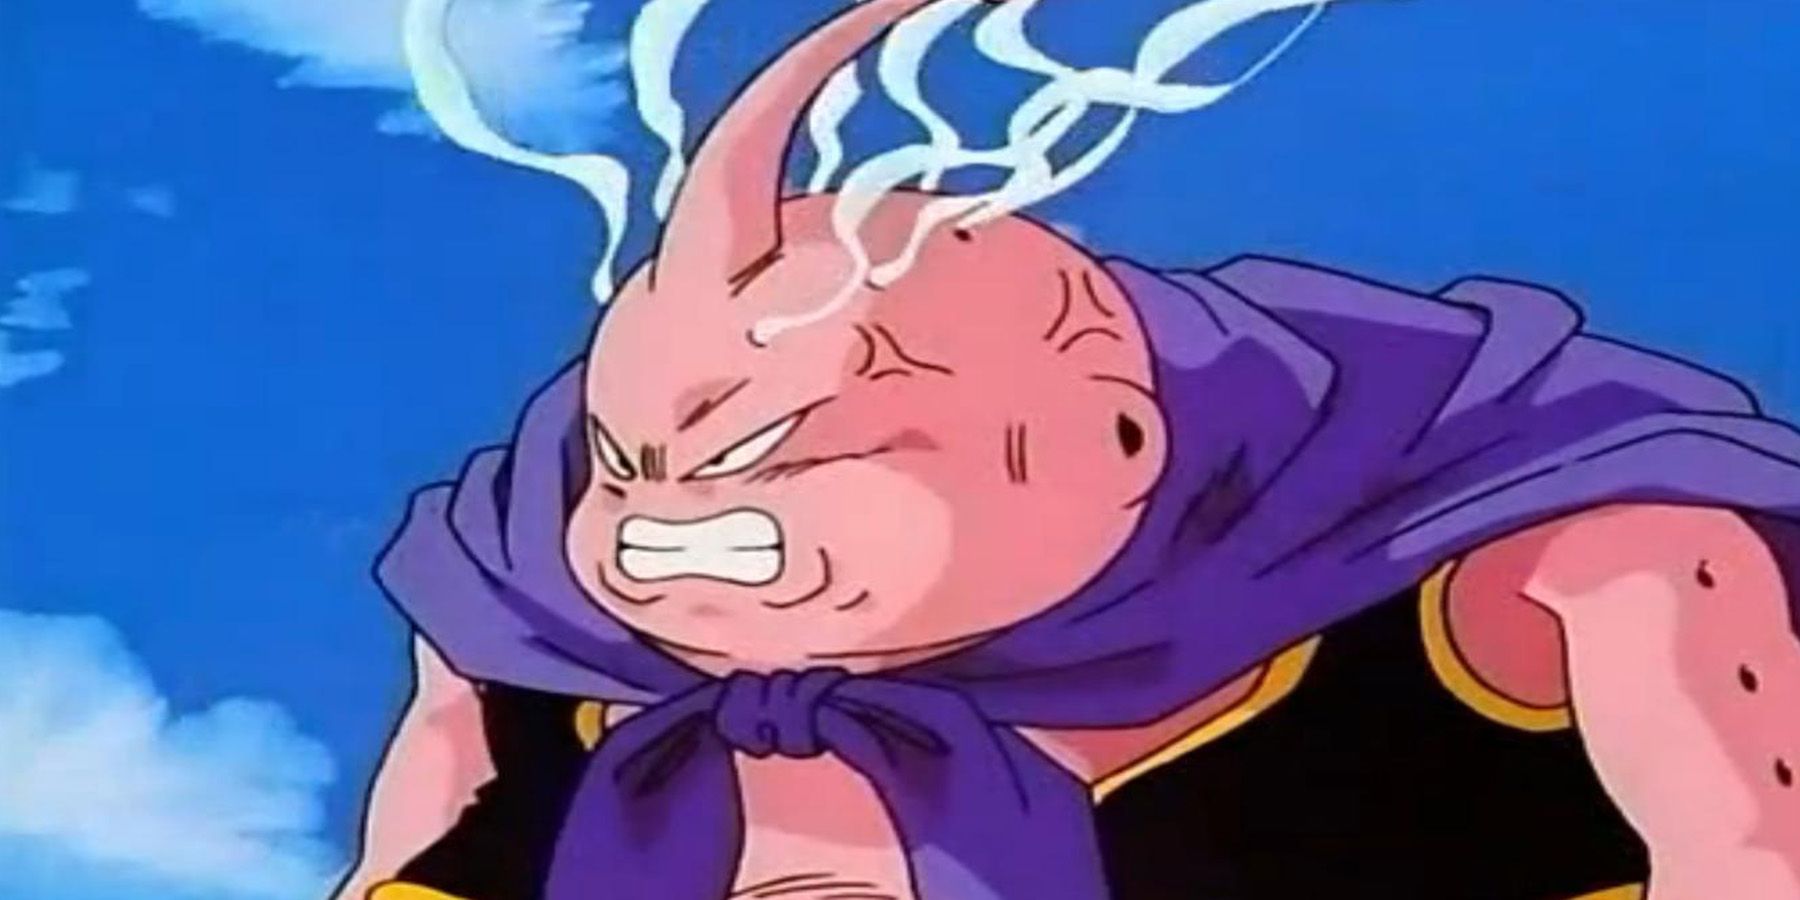 Boo The Buu Saga Dragon Ball Z Should Have Ended With Cell